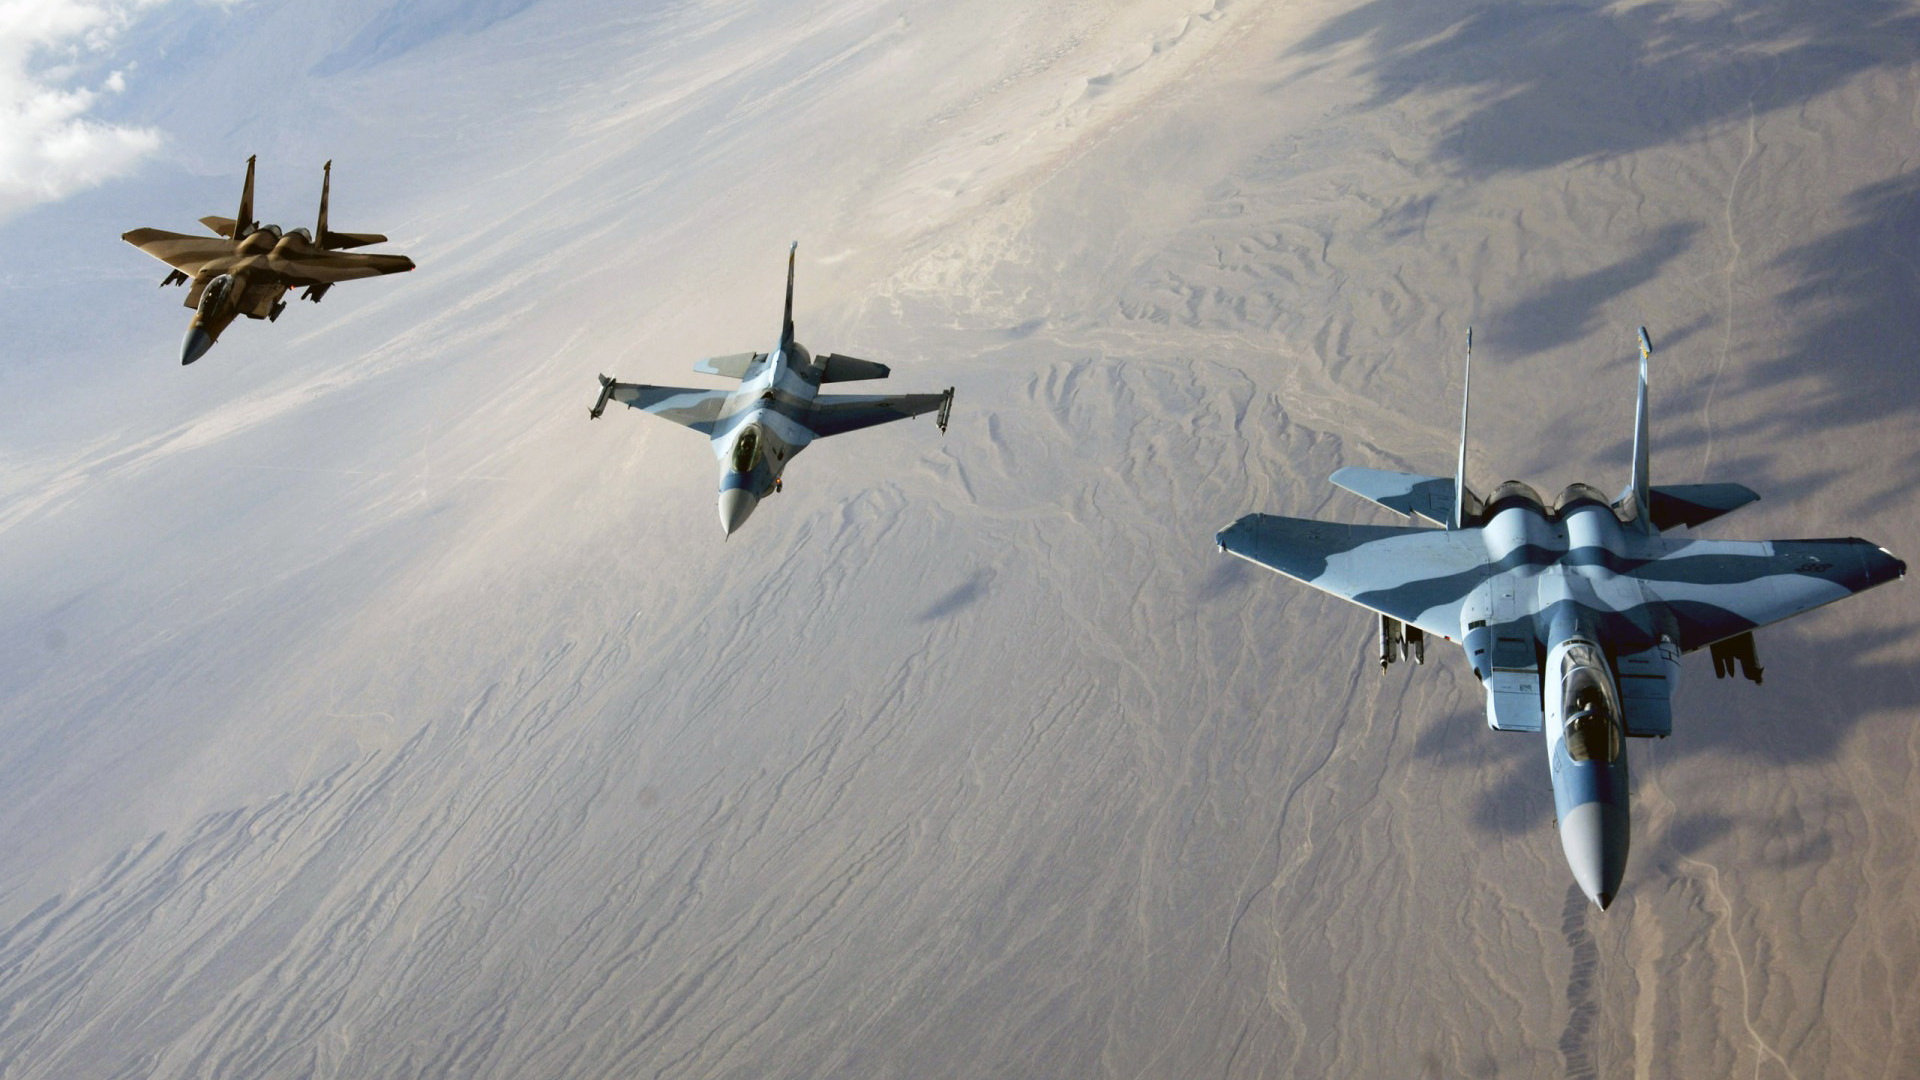 jet fighters, military, jet fighter, aggressor suqadron, general dynamics f 16 fighting falcon, mcdonnell douglas f 15 eagle